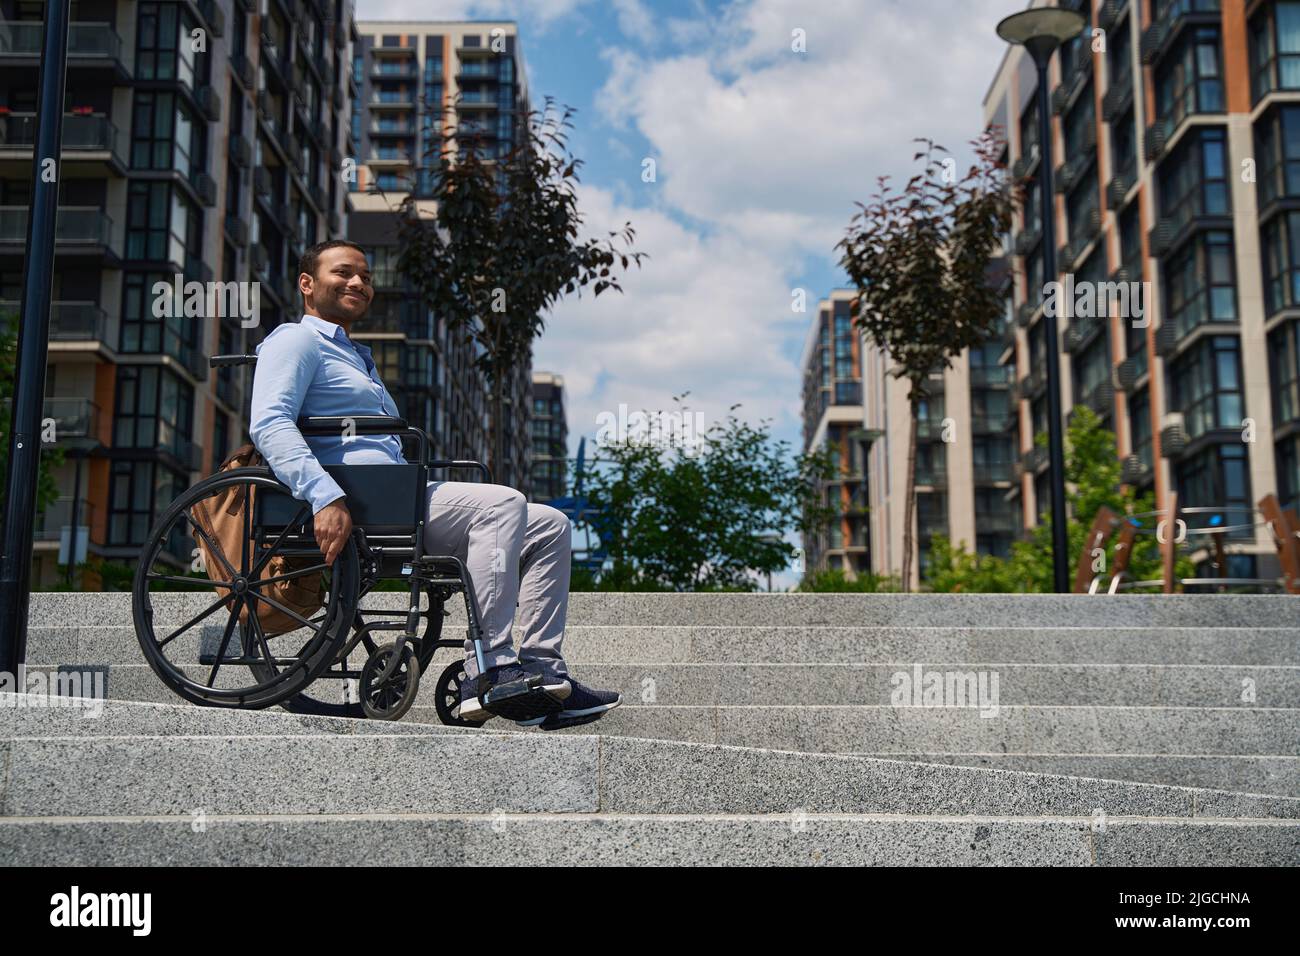 Joyous wheelchair-bound male person descending stairs outdoors Stock Photo